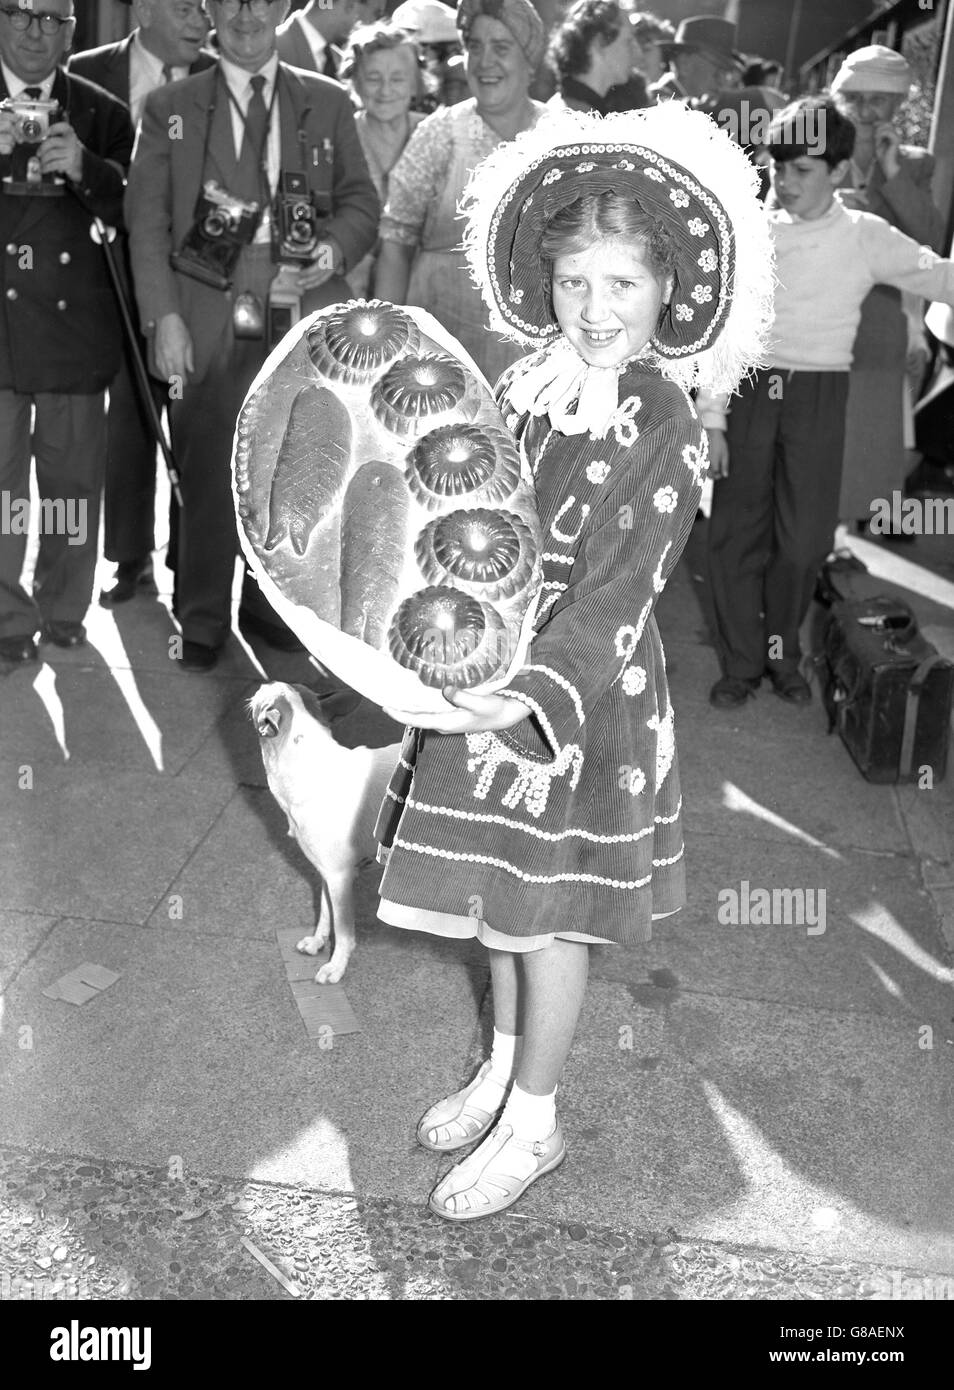 Pearly Princess Shirley Ashmith, 10, of Stone, Kent, carries a bread loaf patterned with five loaves and two fish, on her way to Lady Margaret Church, Walworth, where the annual Harvest Festival was being held. The procession into church of the Pearlies is watched every year by visitors from all over the world. Stock Photo